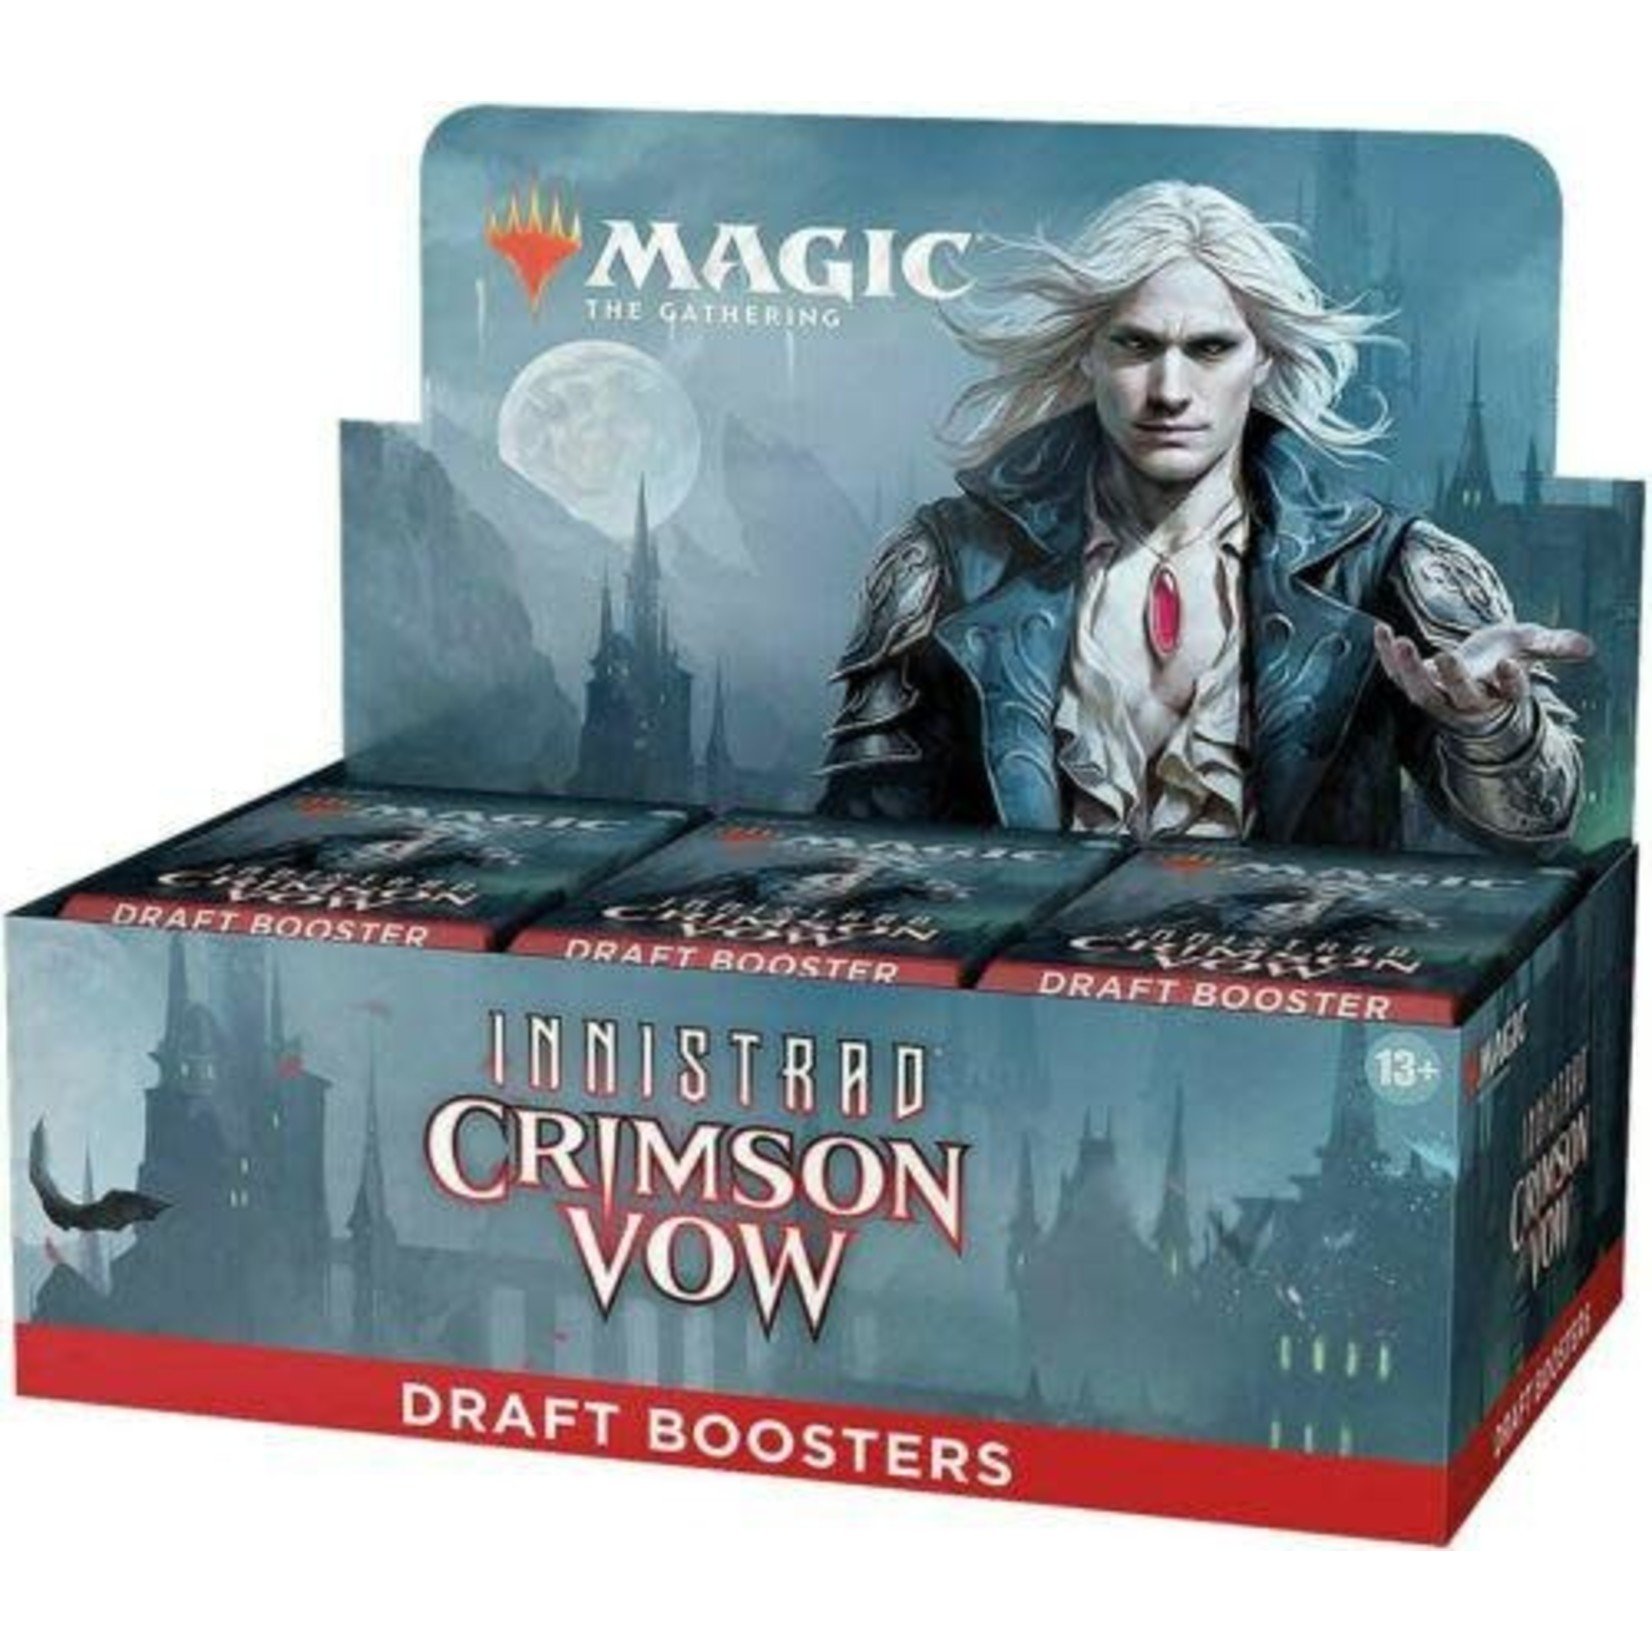 Wizards of the Coast Magic the Gathering: Crimson Vow - Draft Booster Box